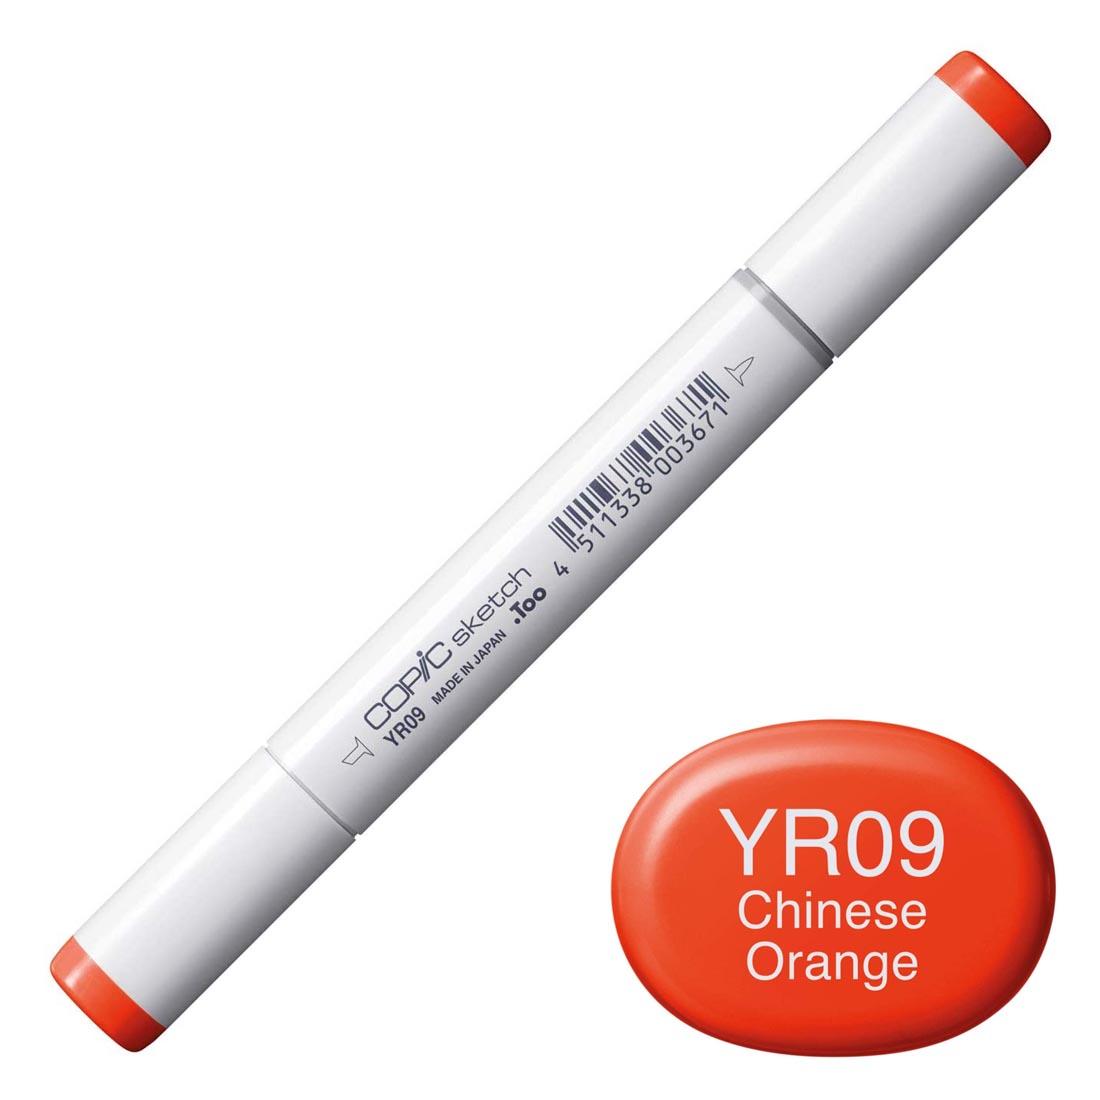 COPIC Sketch Marker with a color swatch and text of YR09 Chinese Orange